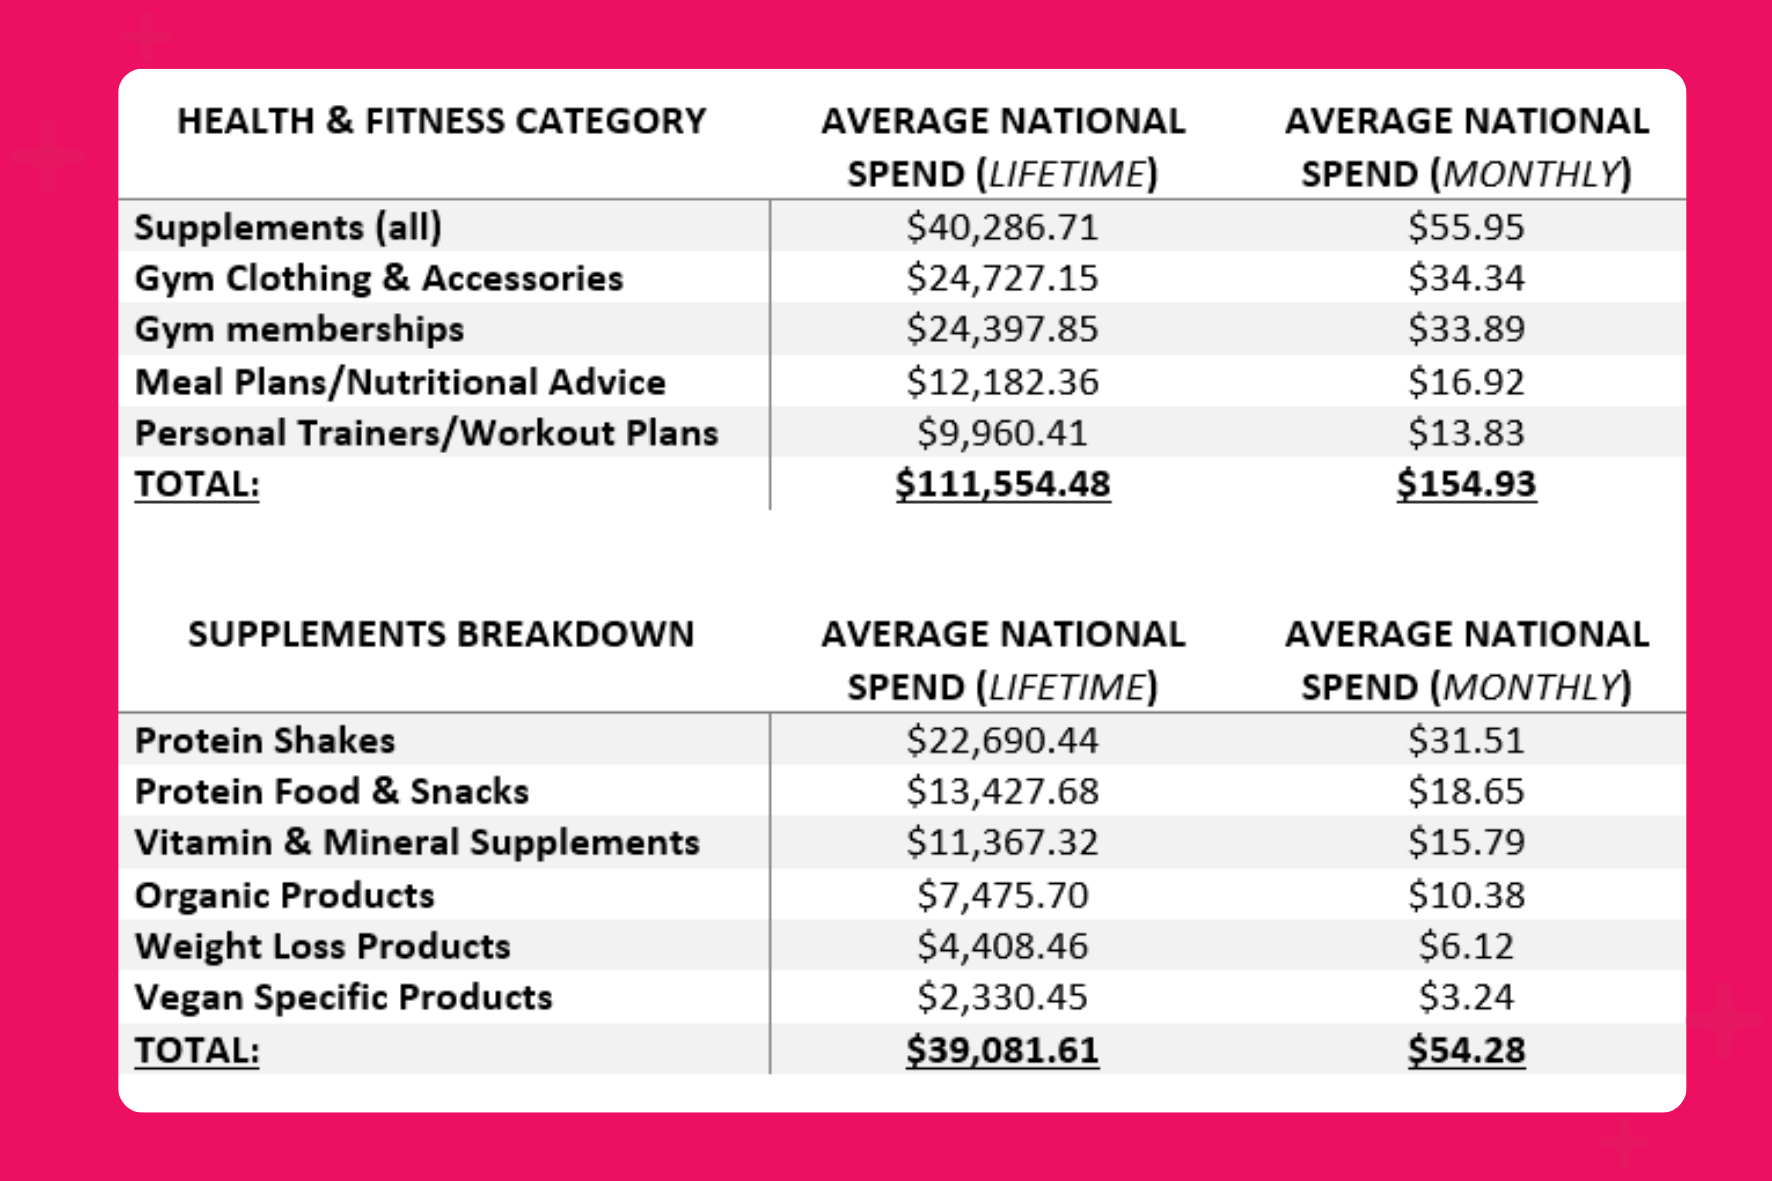 Data from US Survey by My Protein on the average national spend in the health and fitness category including supplements